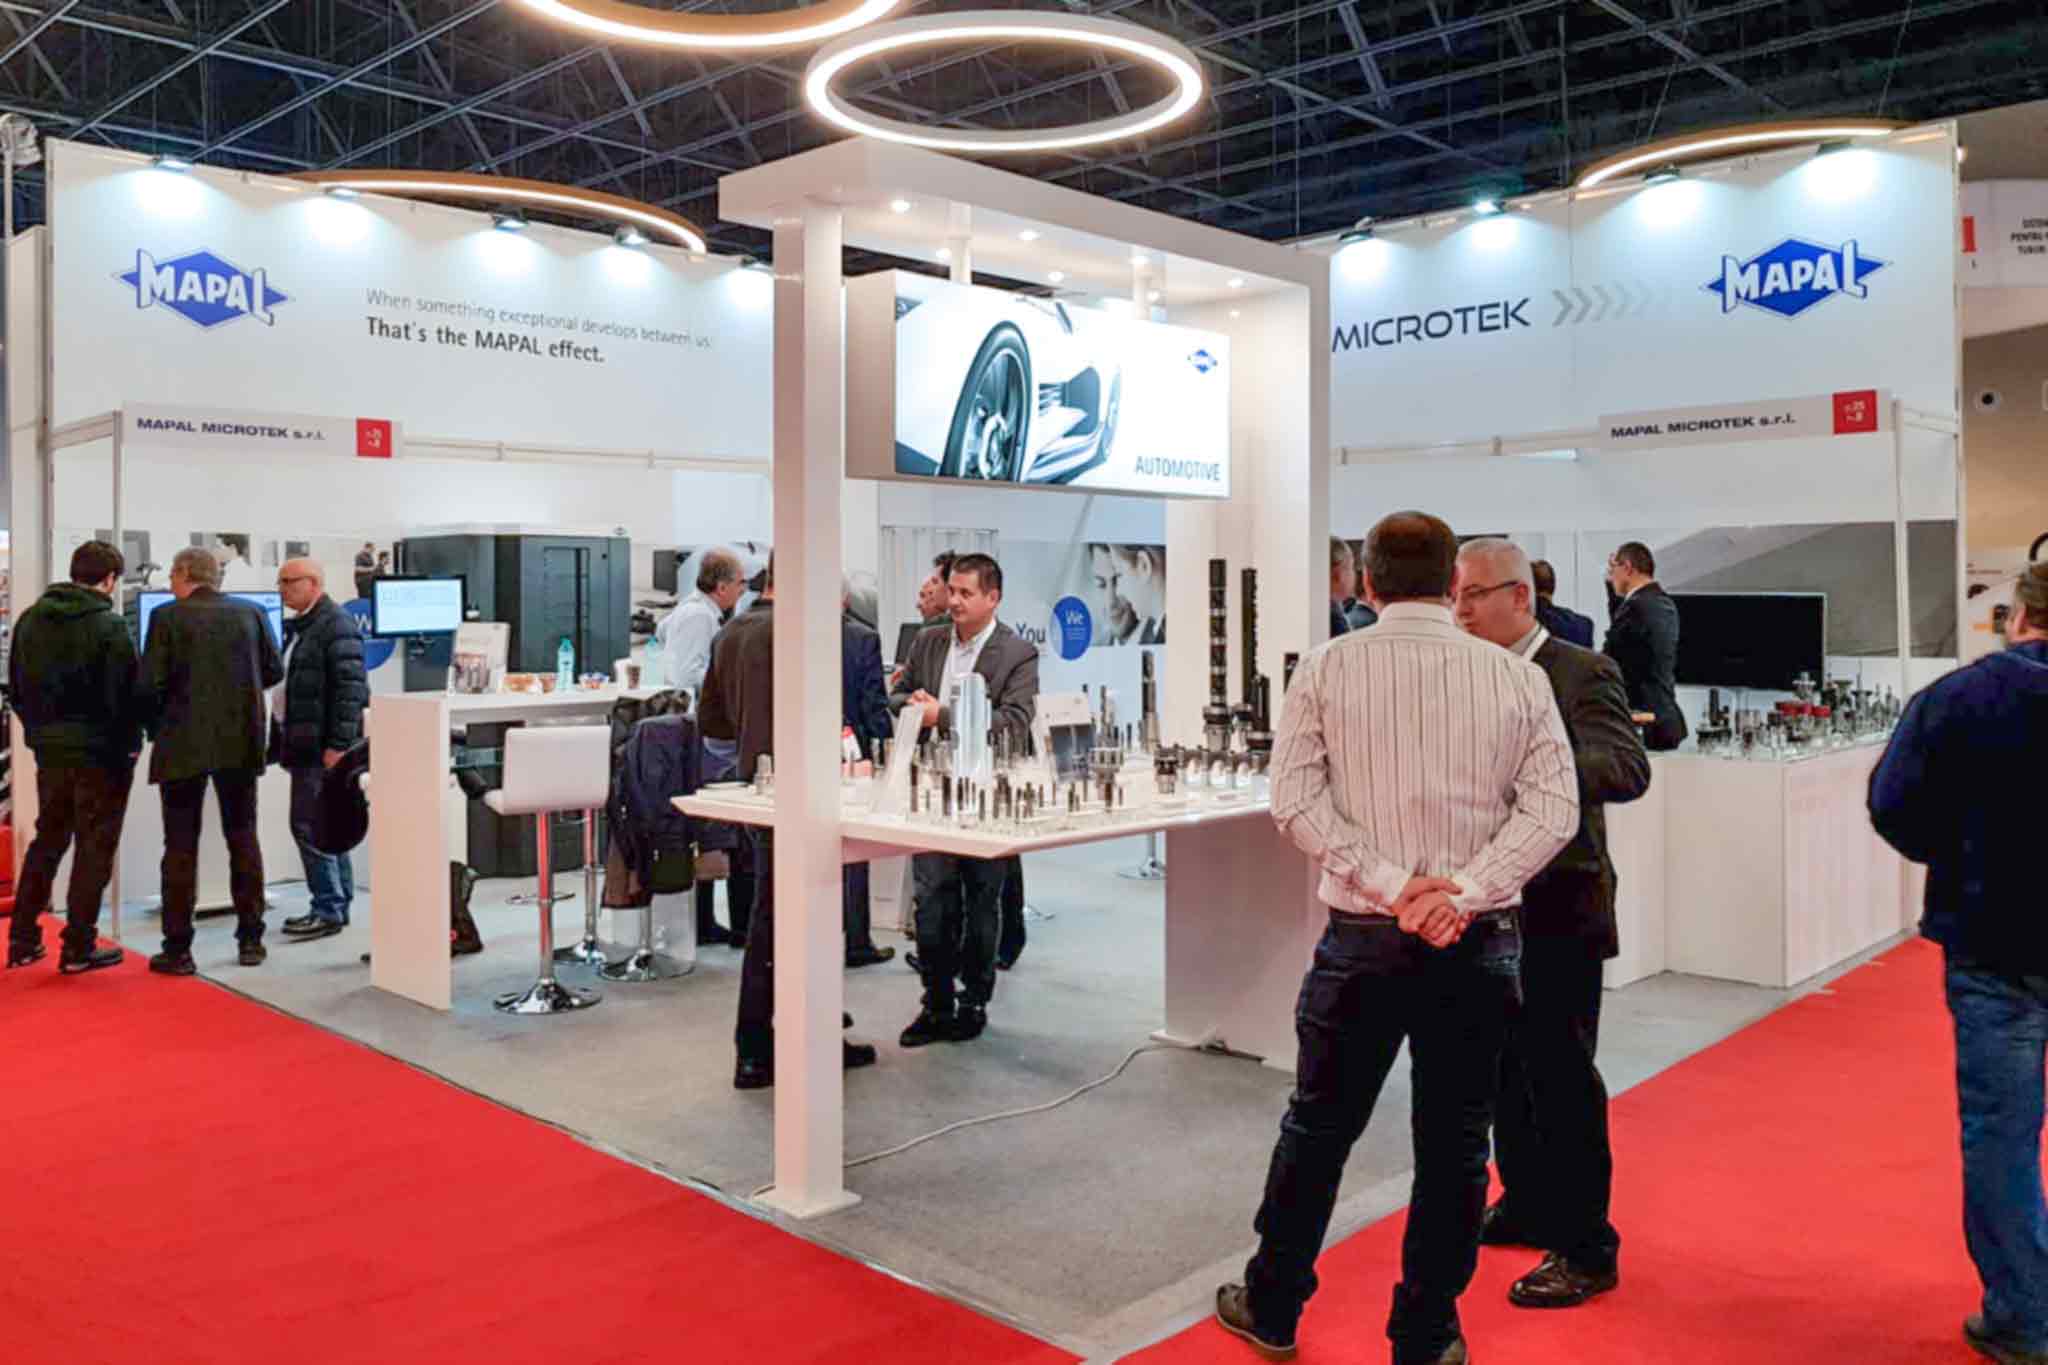 The MAPAL Microtek S.R.L. exhibition stand at Metalshow 2019 in Bucharest, Romania, attended by visitors and employees.